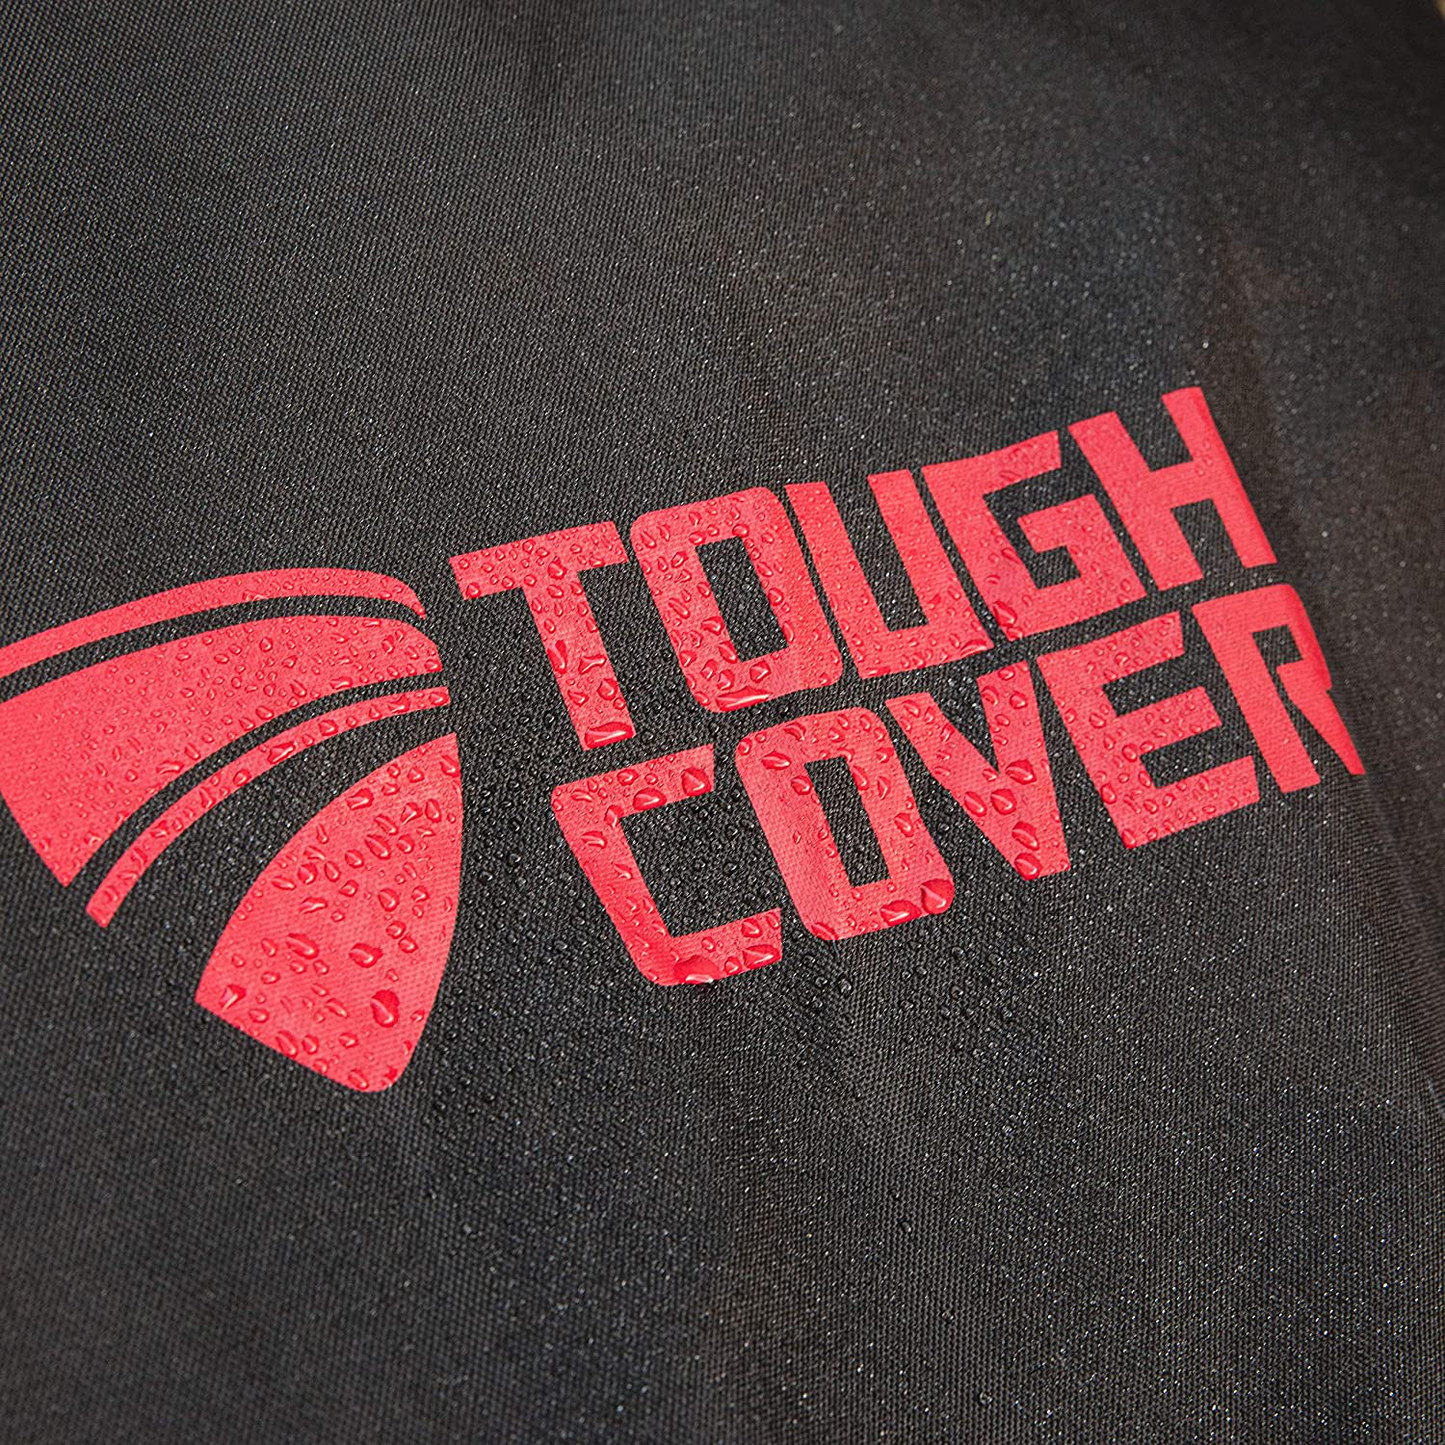 Tough Cover Premium Two-Stage Snow Thrower Cover. Heavy Duty 600D Marine Grade Fabric. Universal Fit. Weather, UV Protection.